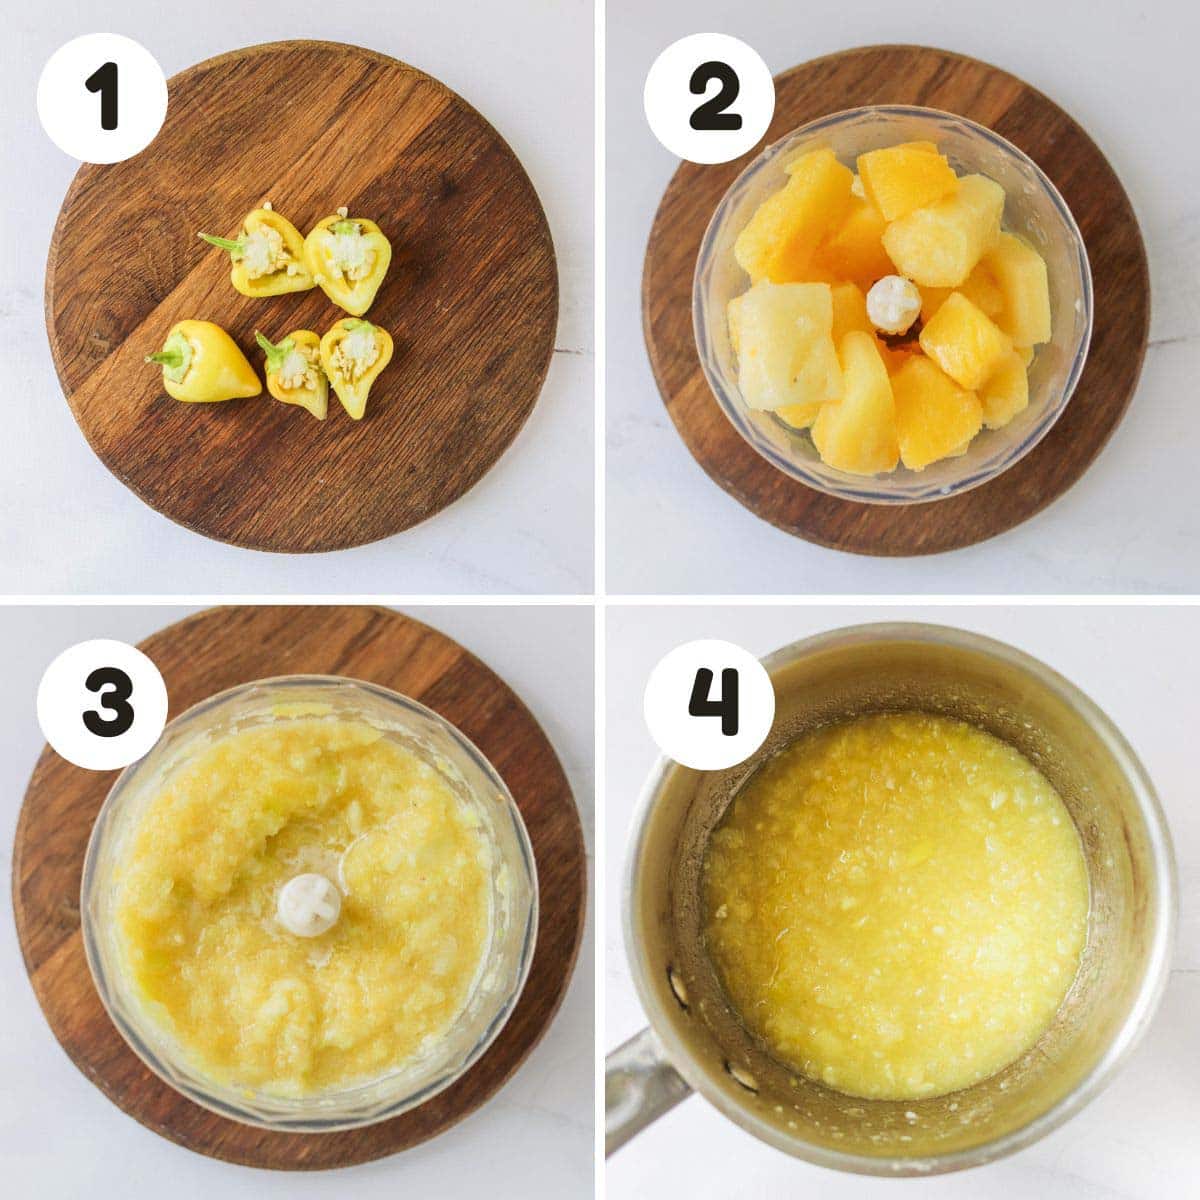 Steps for making the pineapple sauce.